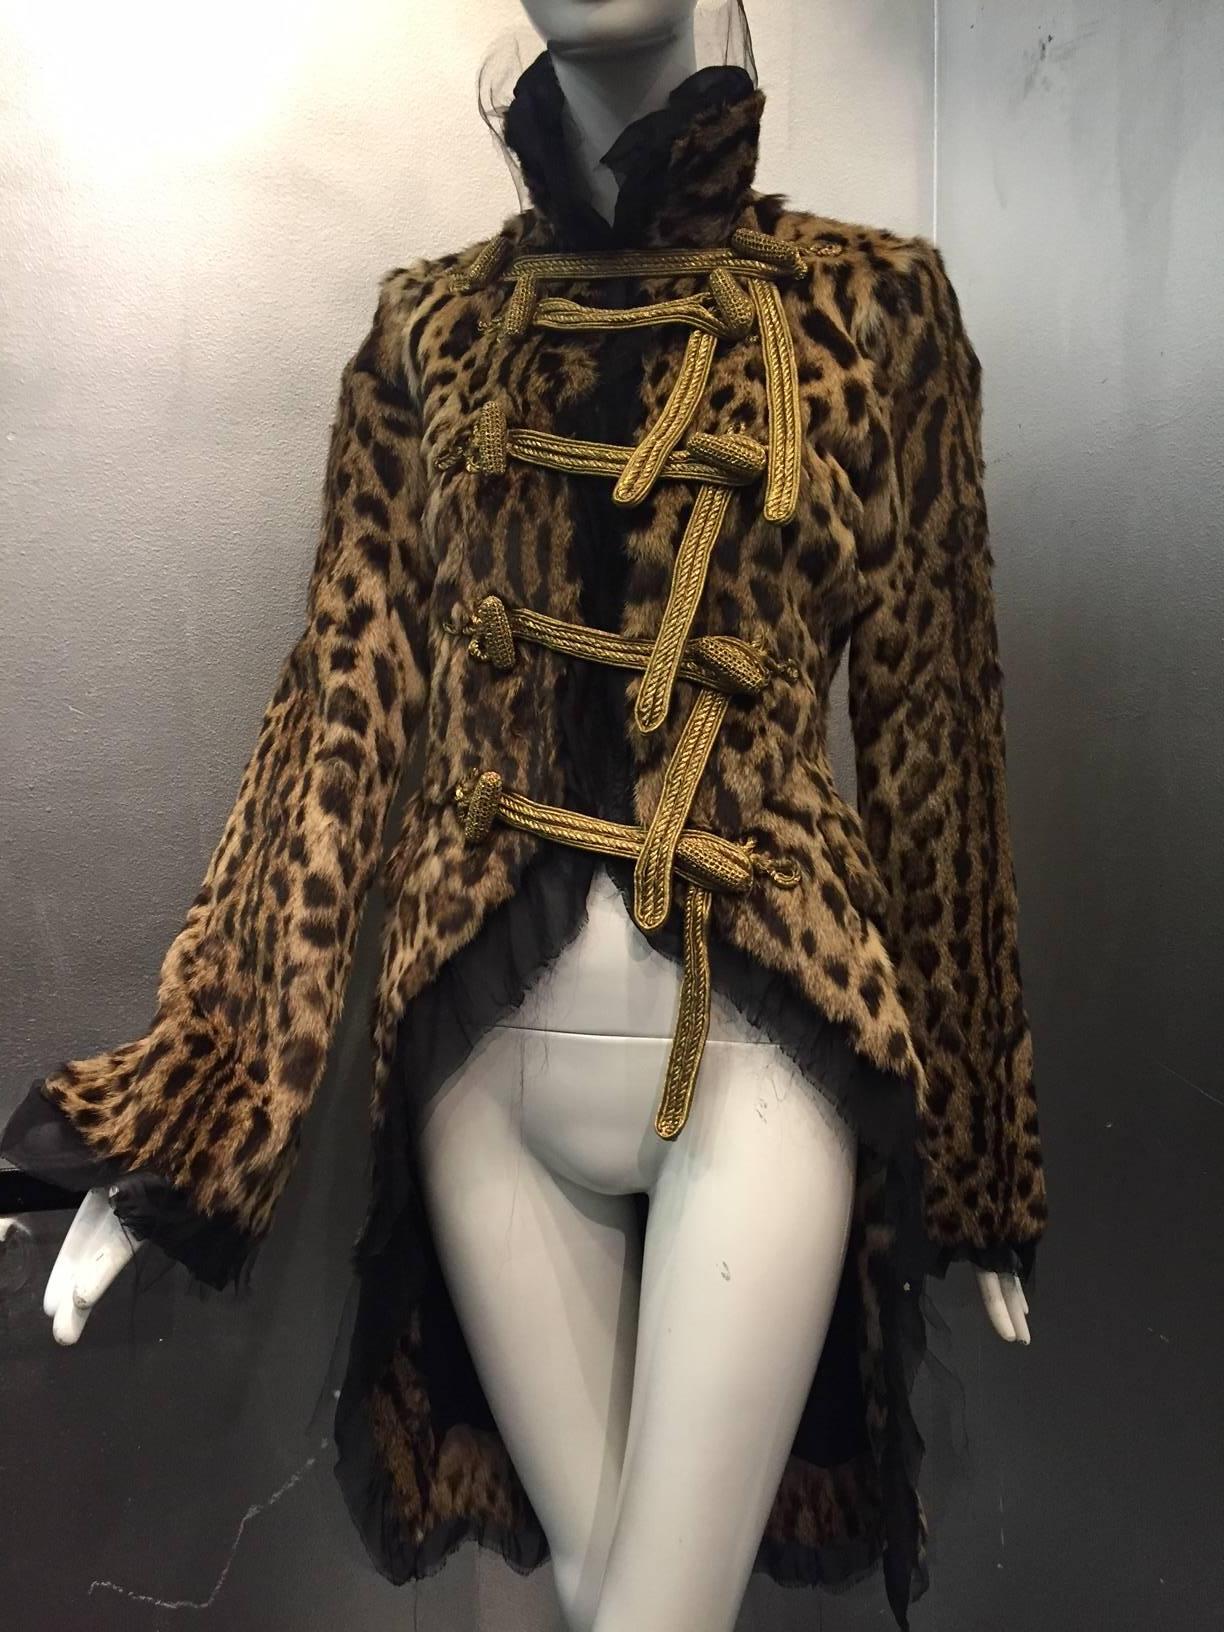 An incredible, one of a kind couture Roberto Cavalli Geoffrey Cat tailcoat: Napoleonic military-inspired shape with raw-edged silk tulle and chiffon trim and lining.  Extravagant gold bullion style functional frog closures. Deep slit cuff openings. 